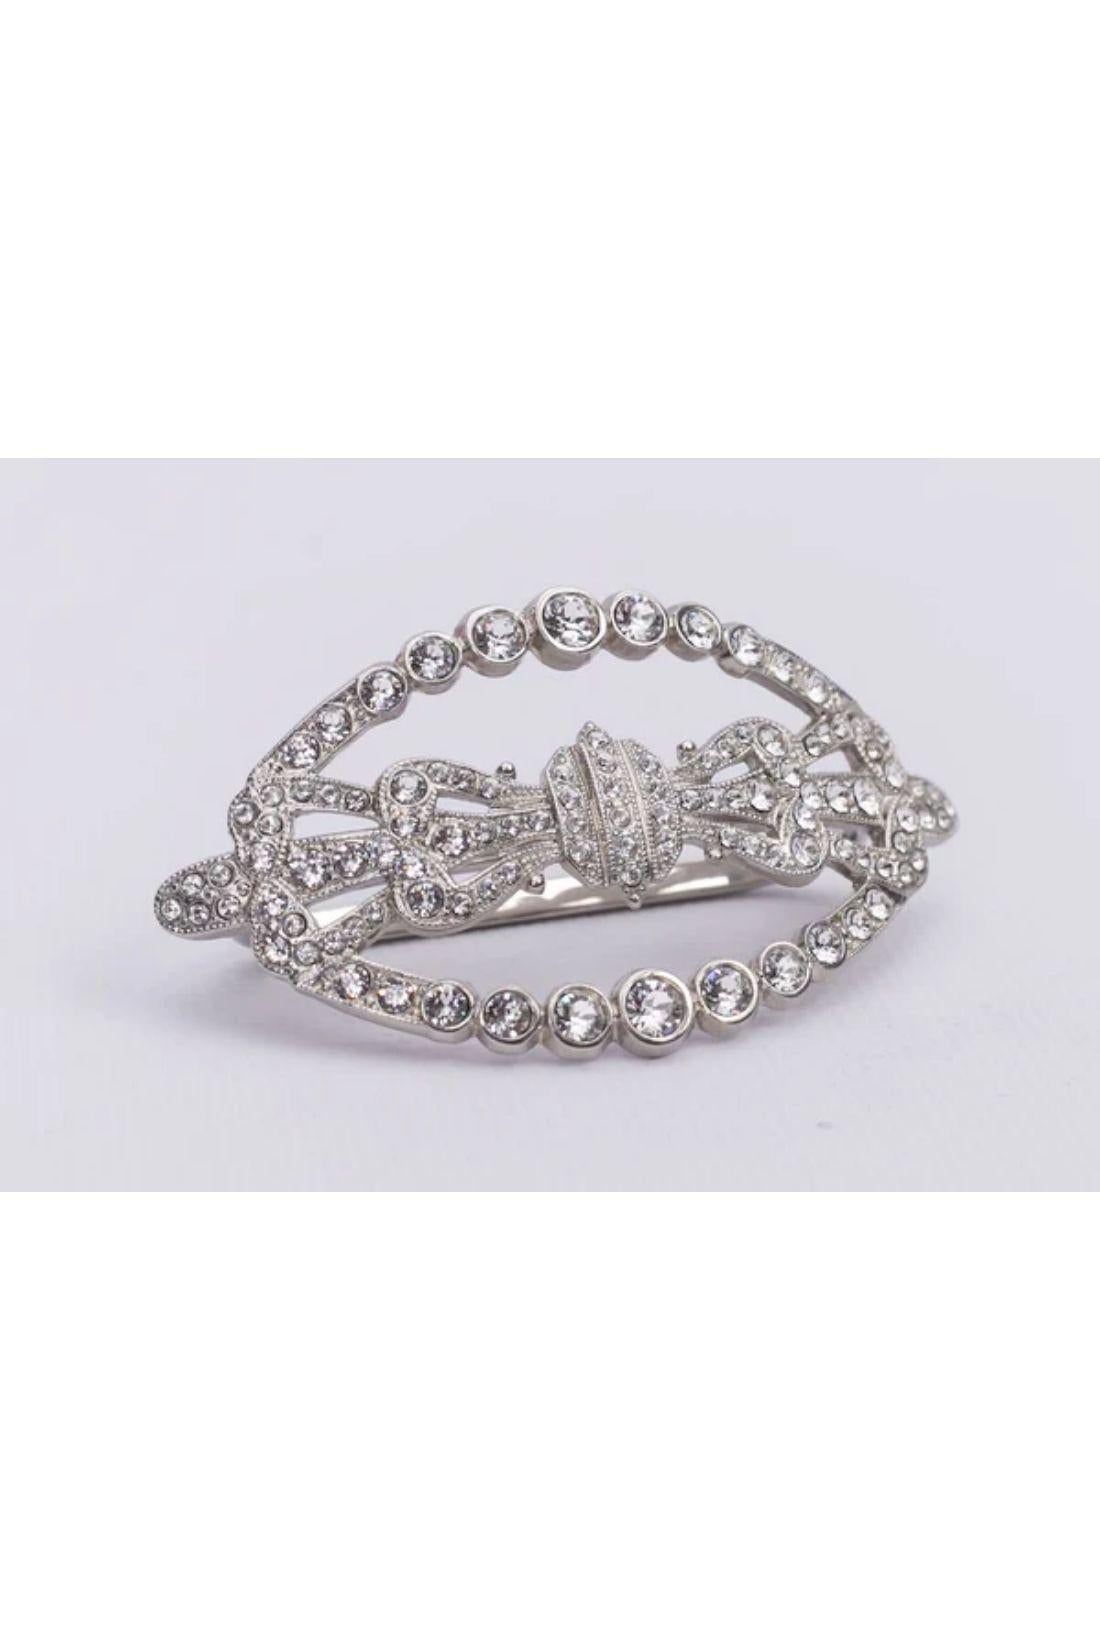 Paco Rabanne - Three-fingers ring in silver-plate paved with rhinestones.

Additional information:

Dimensions:

Ornament: 8 W x 4 H cm (3.15